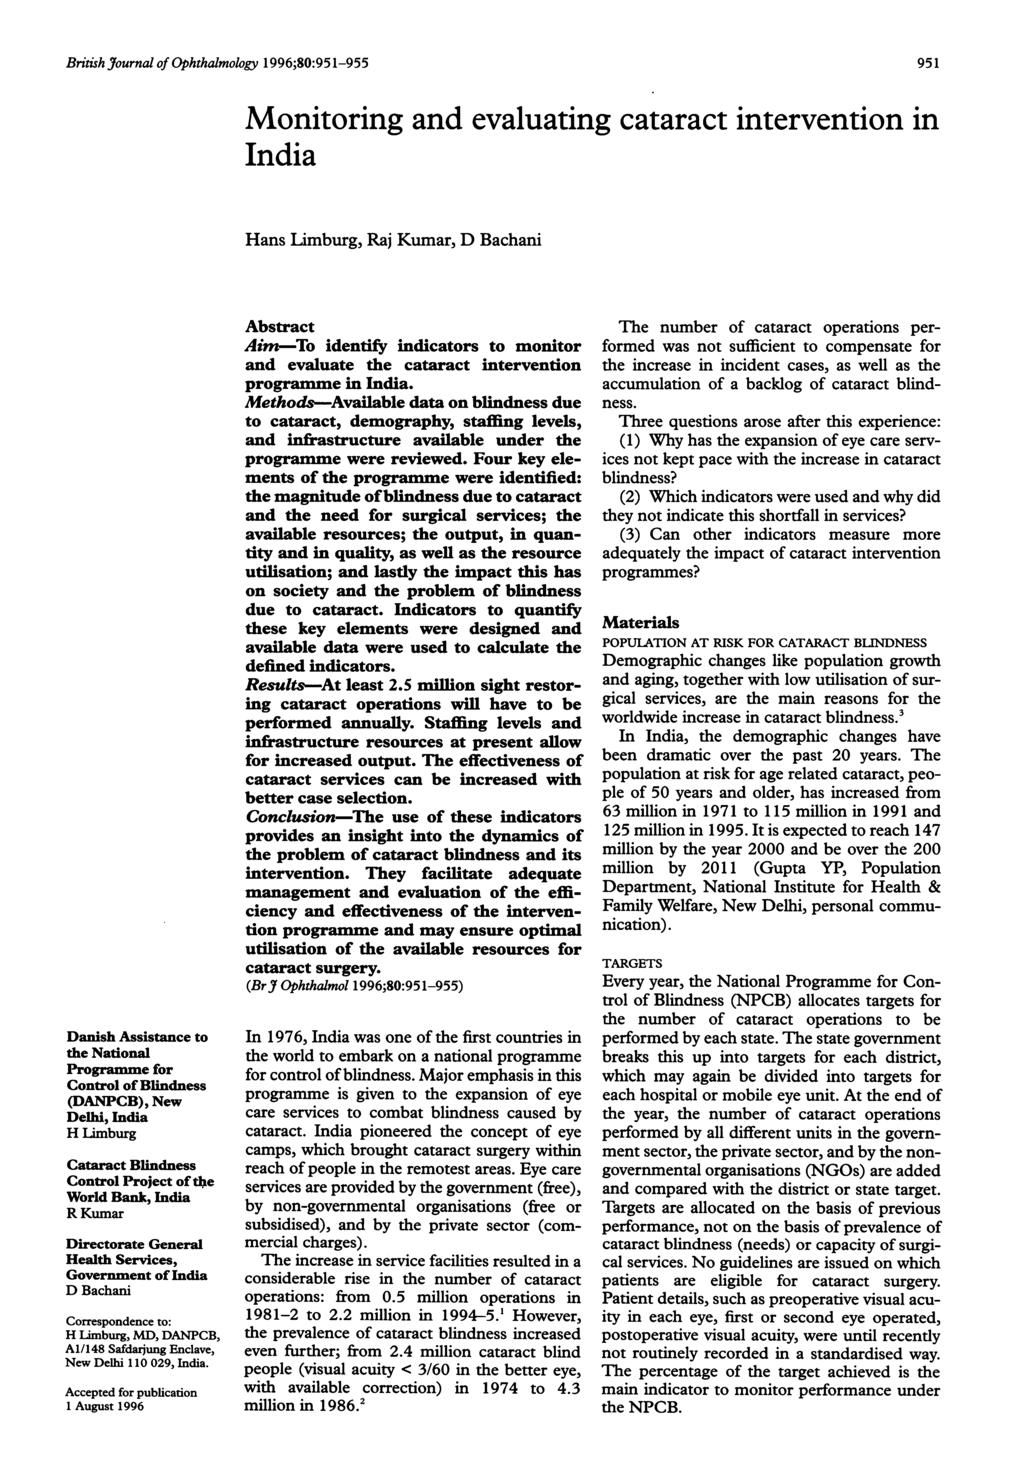 British Journal of Ophthalmology 1996;80:951-955 Danish Assistance to the National Programme for Control of Blindness (DANPCB), New Delhi, India H Limburg Cataract Blindness Control Project of the